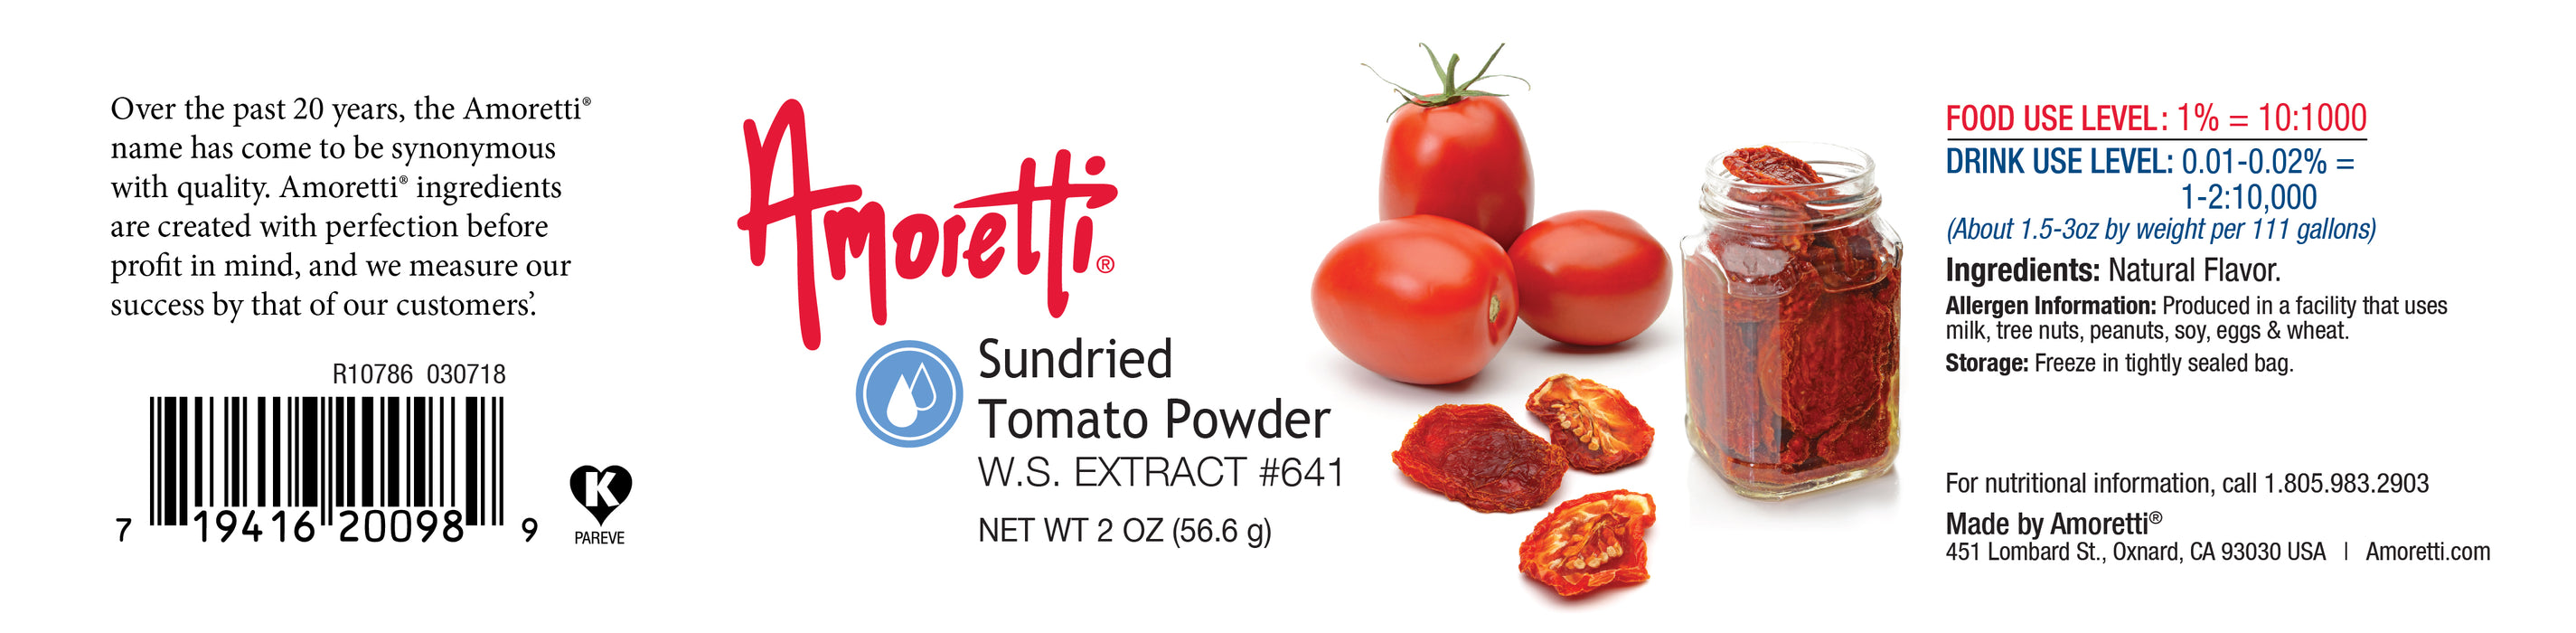 Sundried Tomato Extract Powder Water Soluble